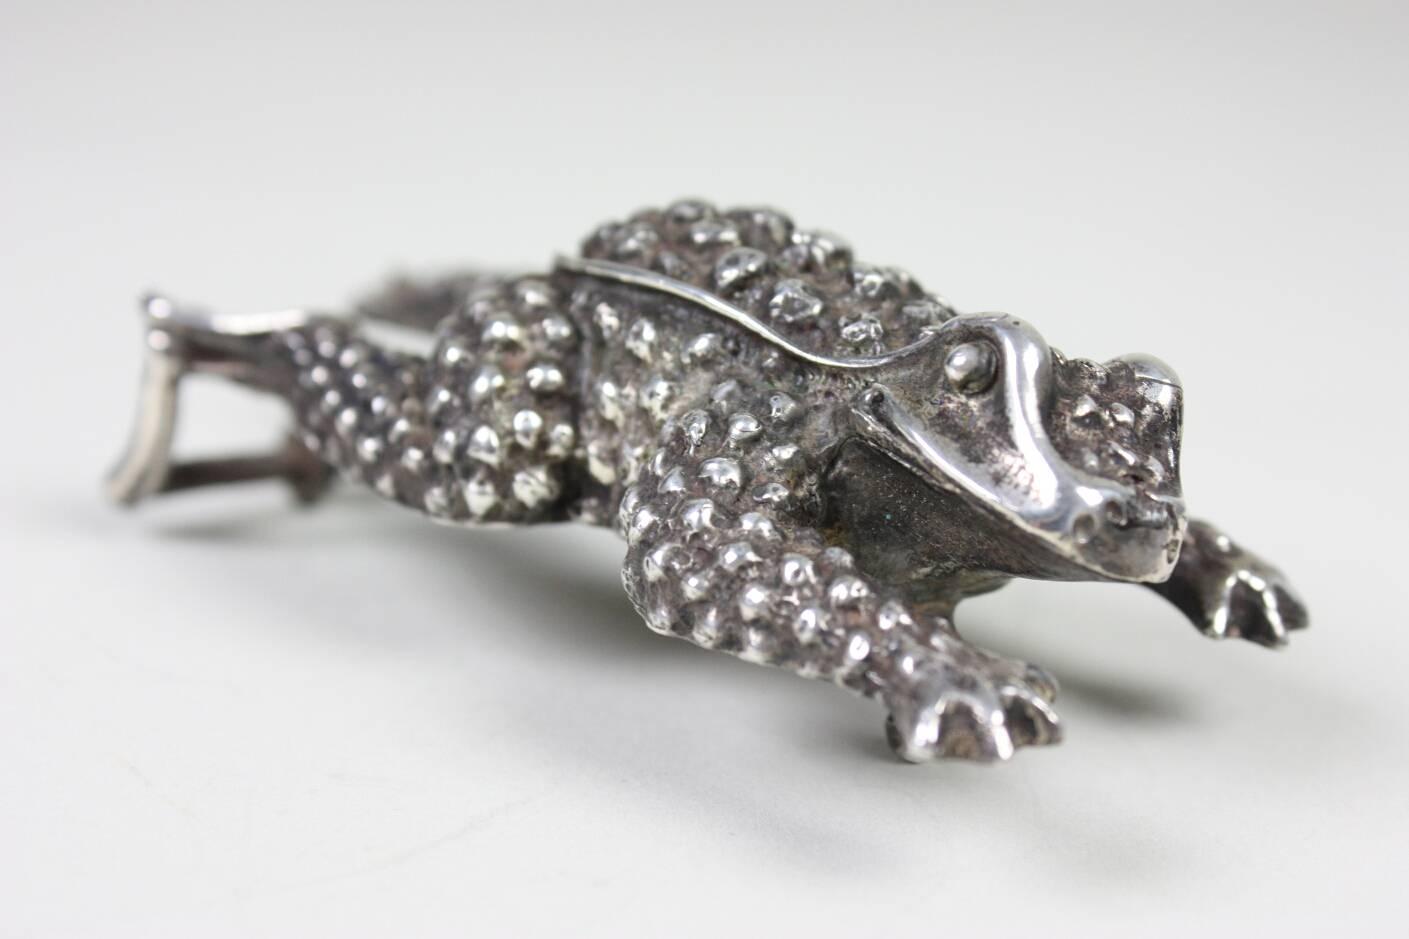 Vintage frog buckle from Barry Kieselstein-Cord is made of sterling silver with a beautiful patina.  It is stamped on the underside.

Measurements-
Length: 4 1/4